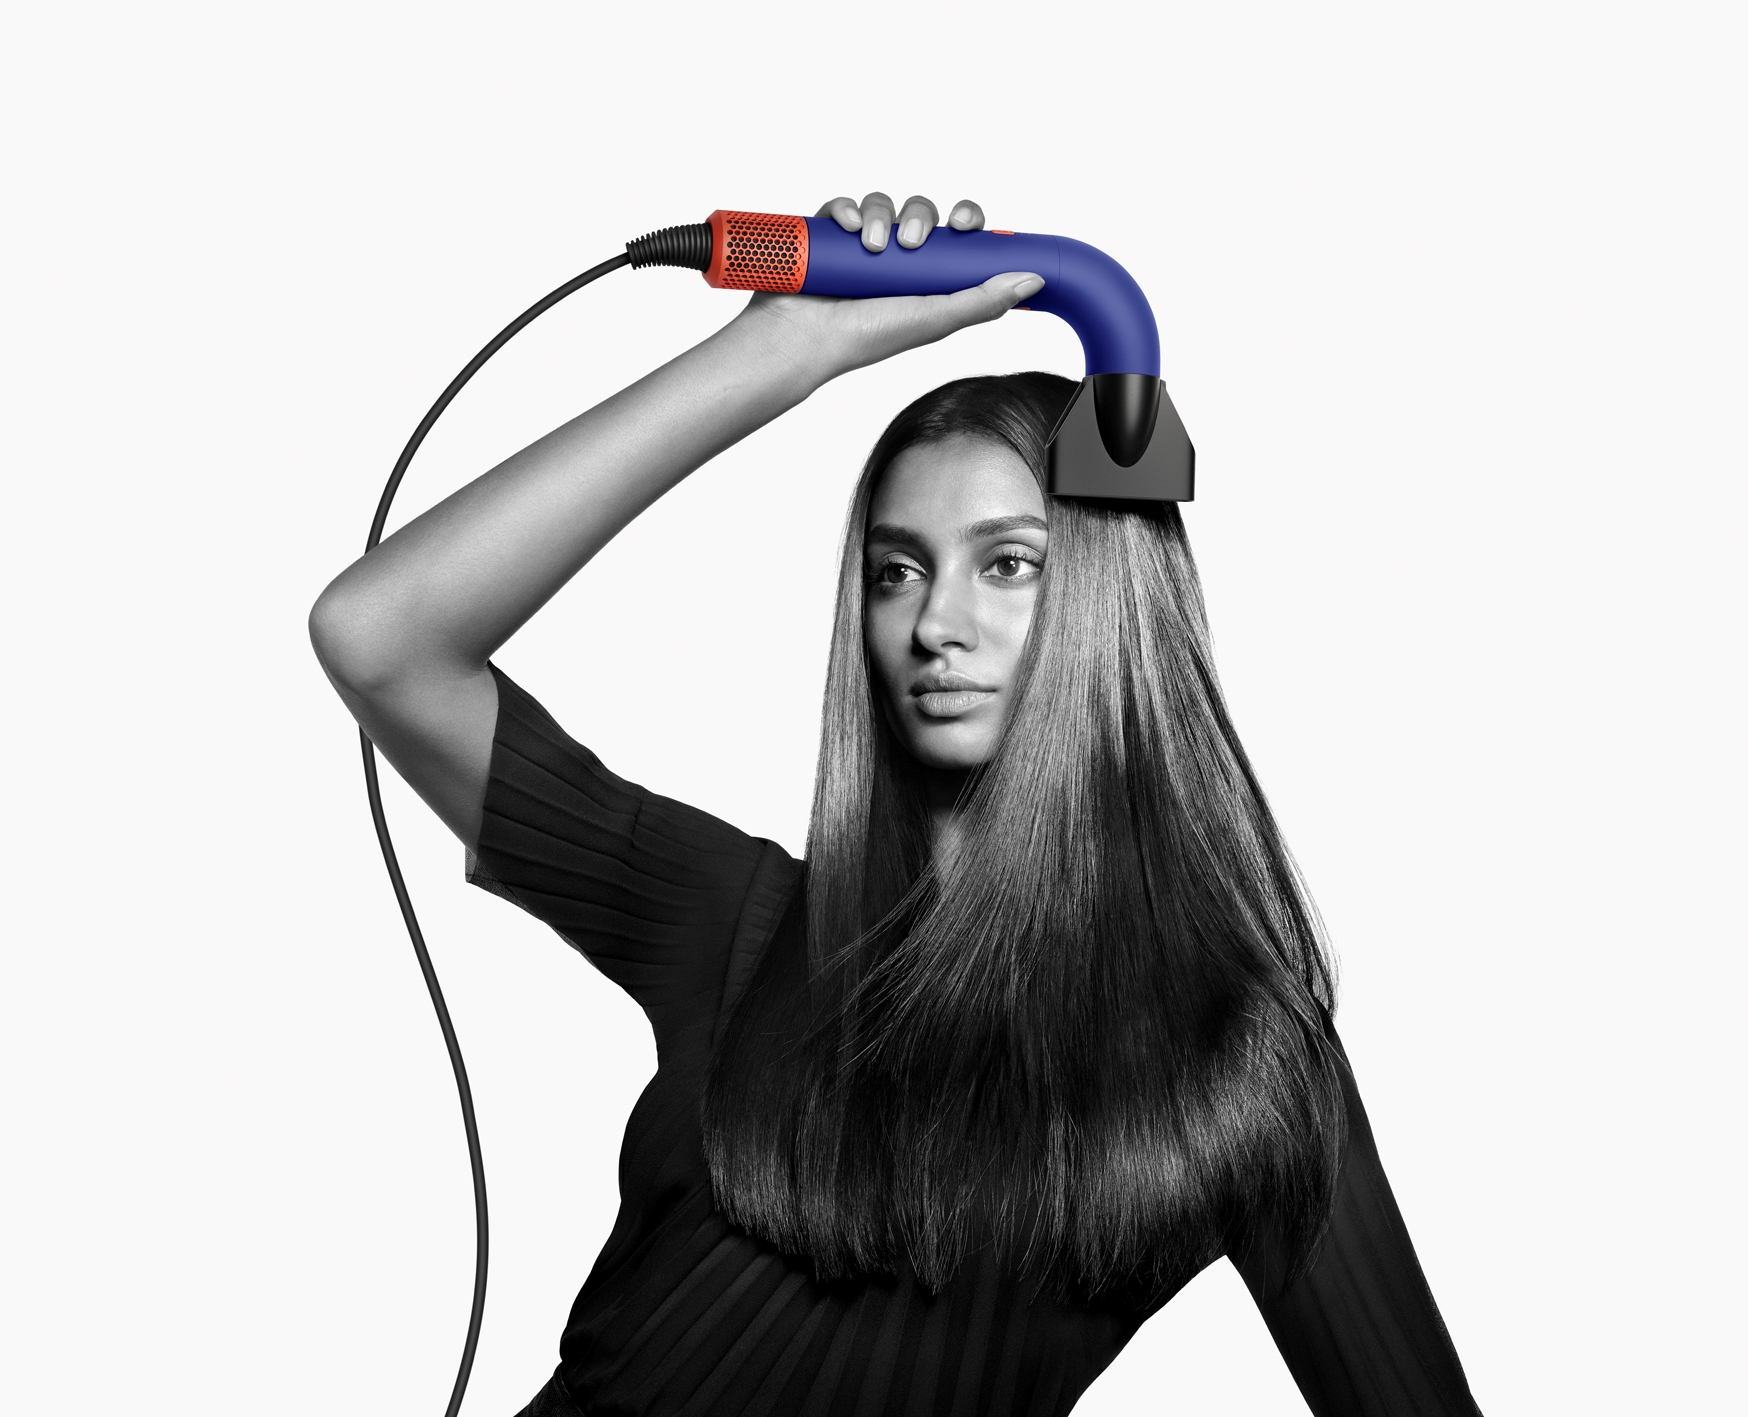 Introducing the precision hair dryer – the Dyson Supersonic for professional styling